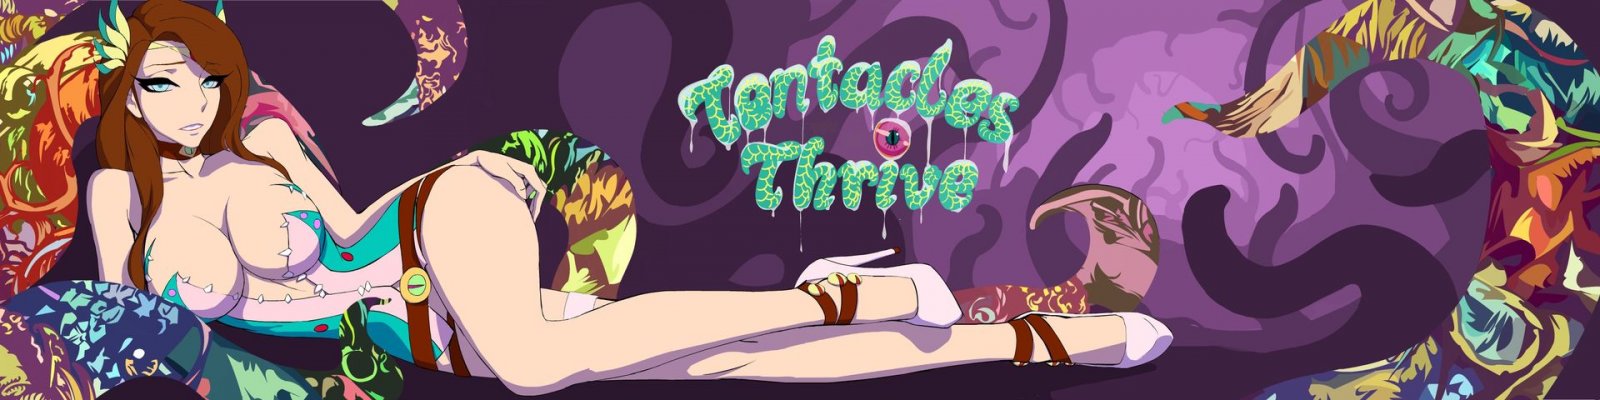 Tentacles Thrive poster